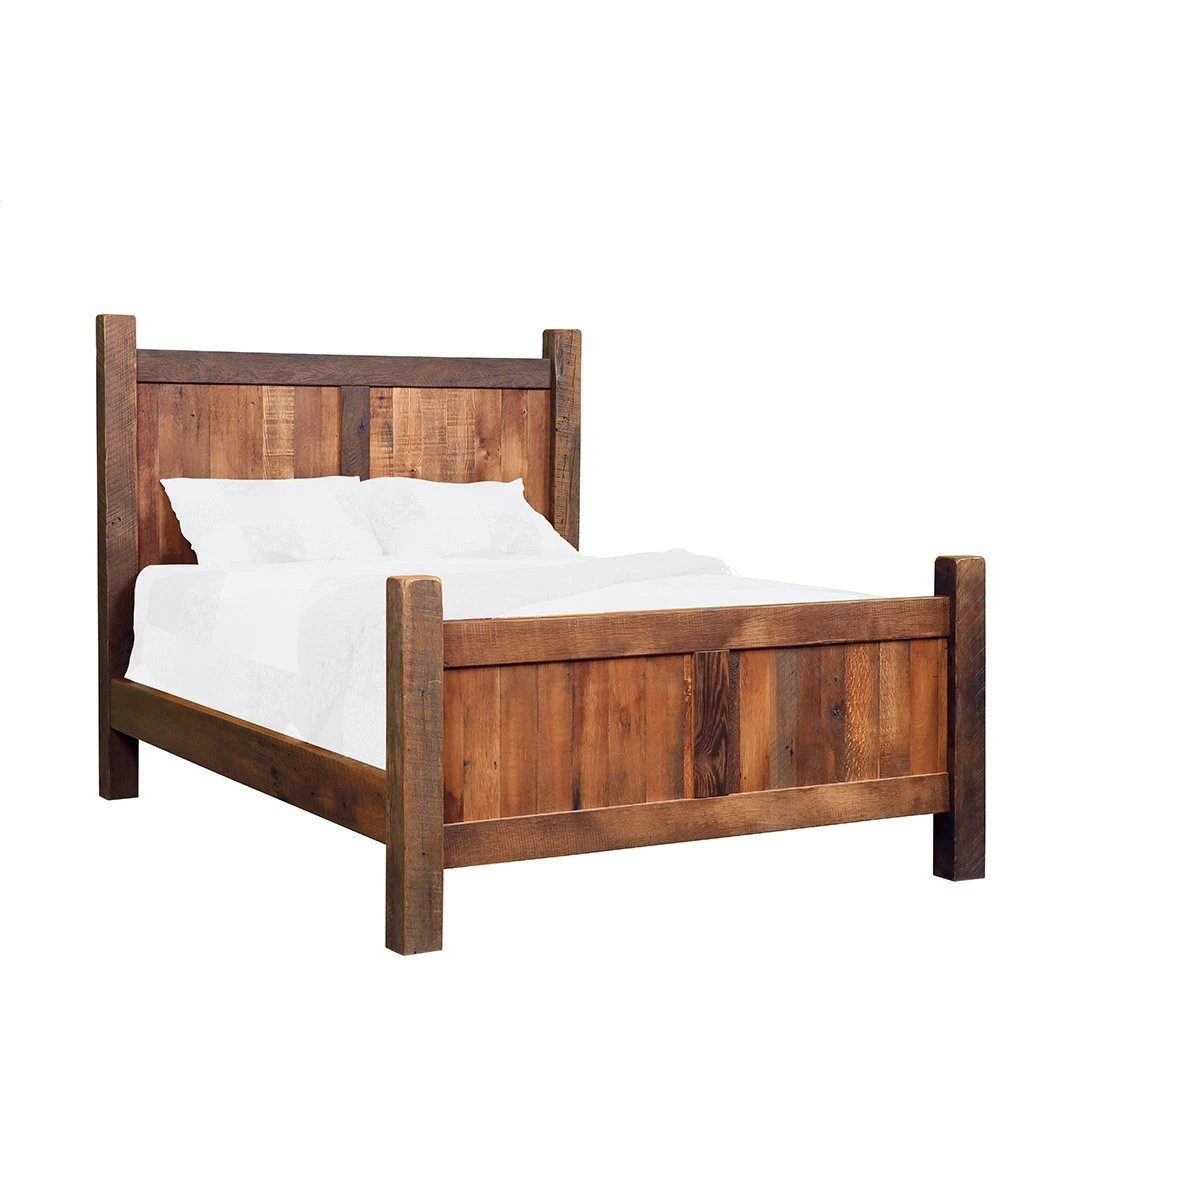 Fullerton Rustic Bed Frame, Reclaimed Wood, Natural Stain